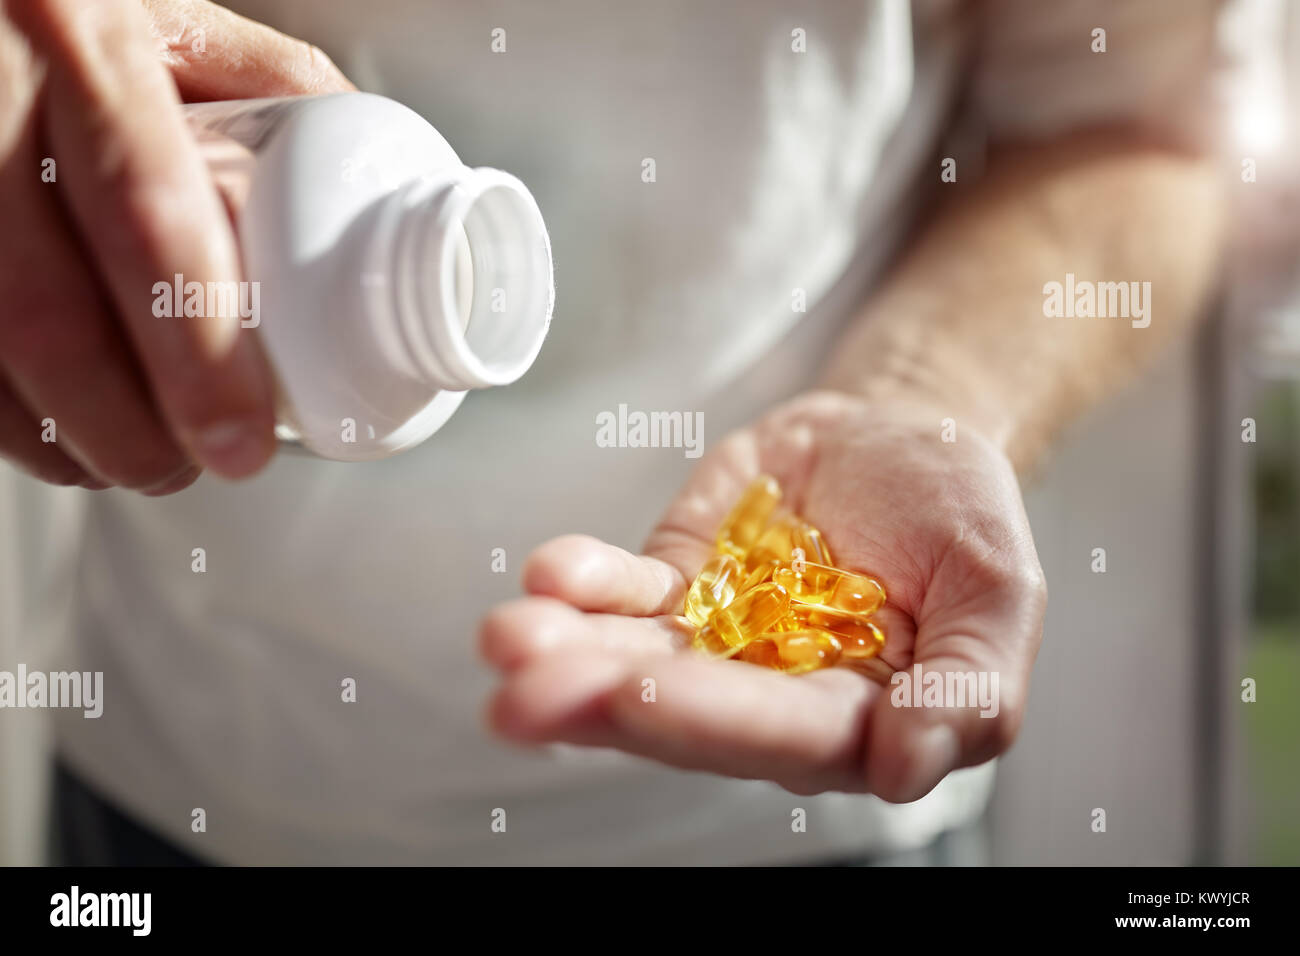 Bottle of omega 3 fish oil capsules pouring into hand Stock Photo